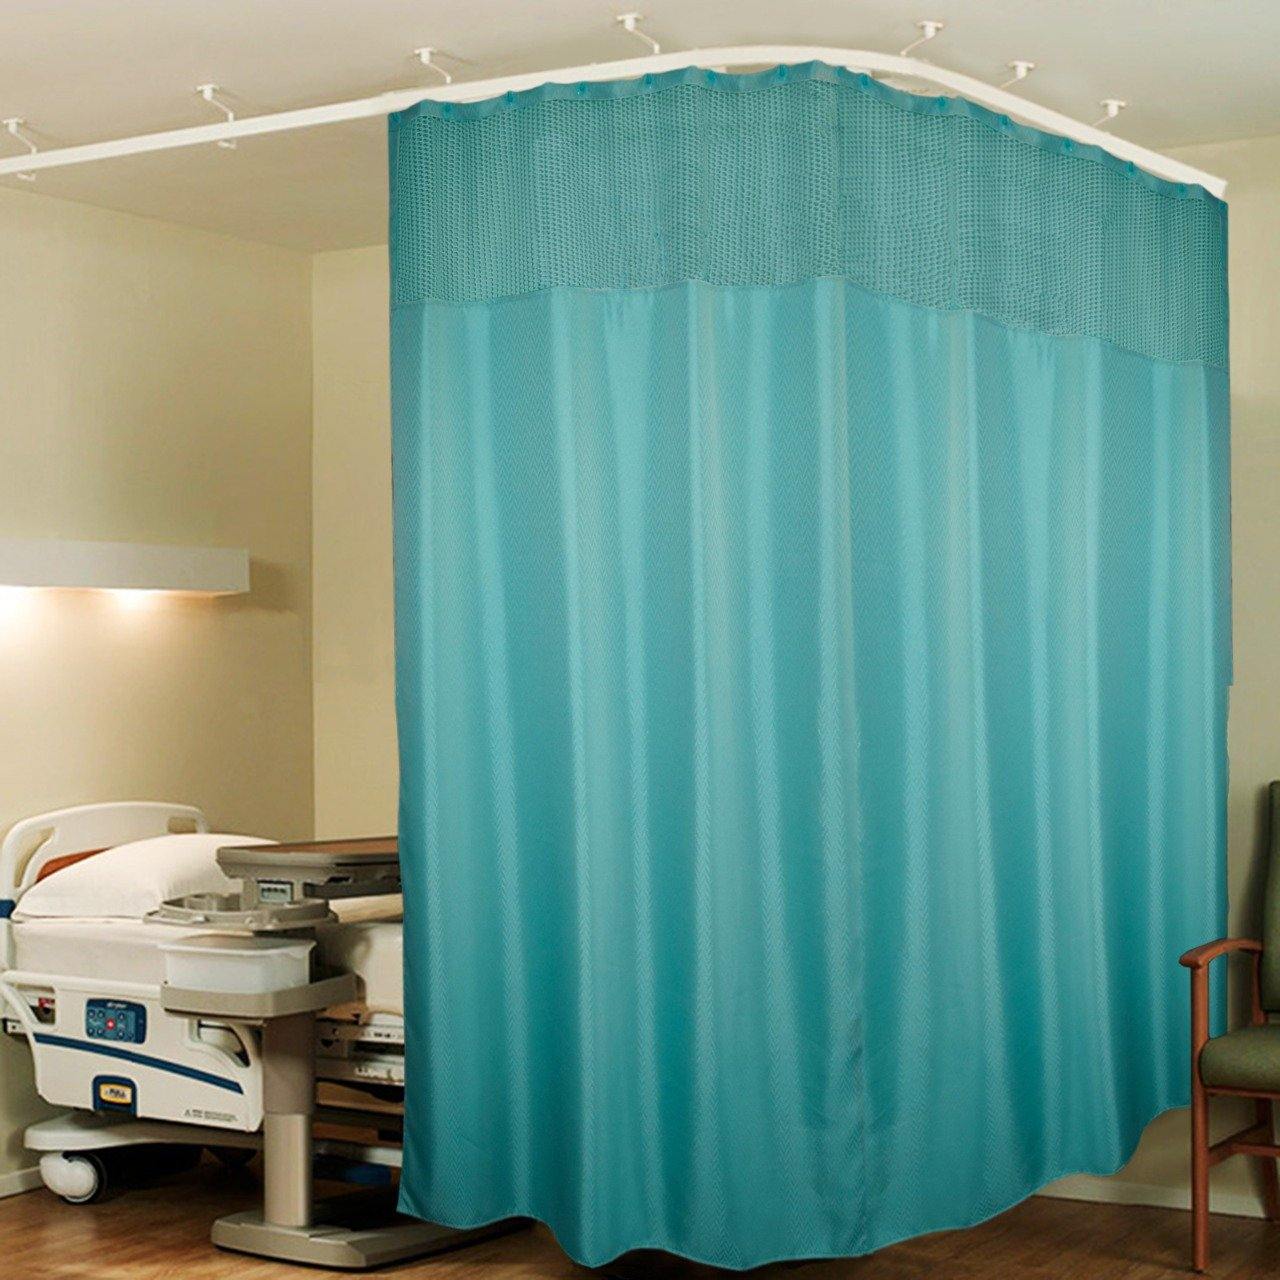 Lushomes Green Full Sized Hospital ICU Bed Zig Zag Curtain with 16 Eyelets and 16 C-Hooks and Net (8Ft x 7Ft, 2 Panels Attached) - Lushomes